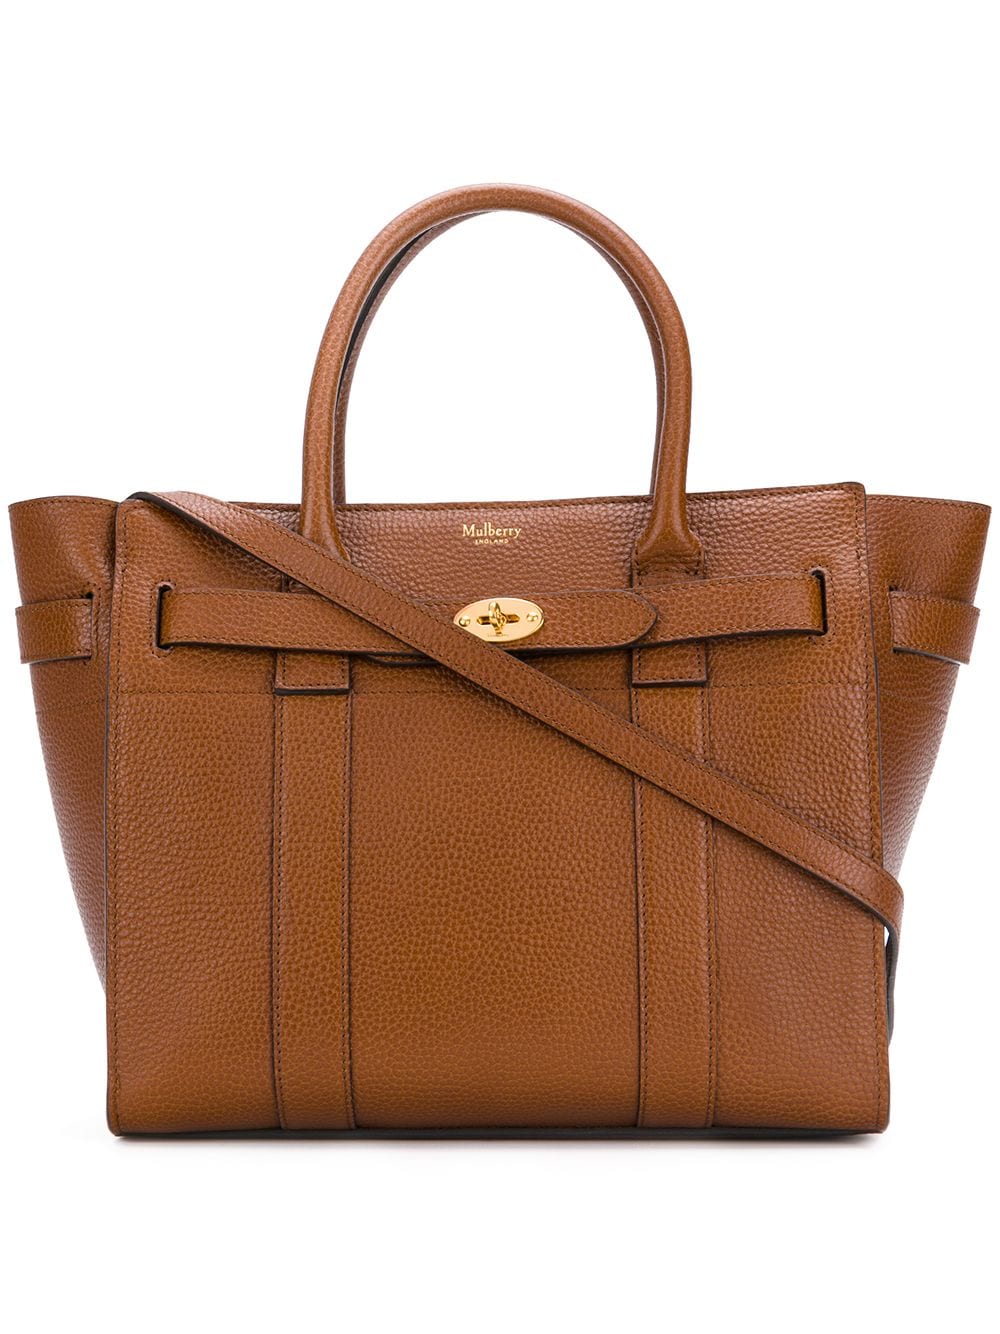 Mulberry Bayswater Tote Bag - Farfetch